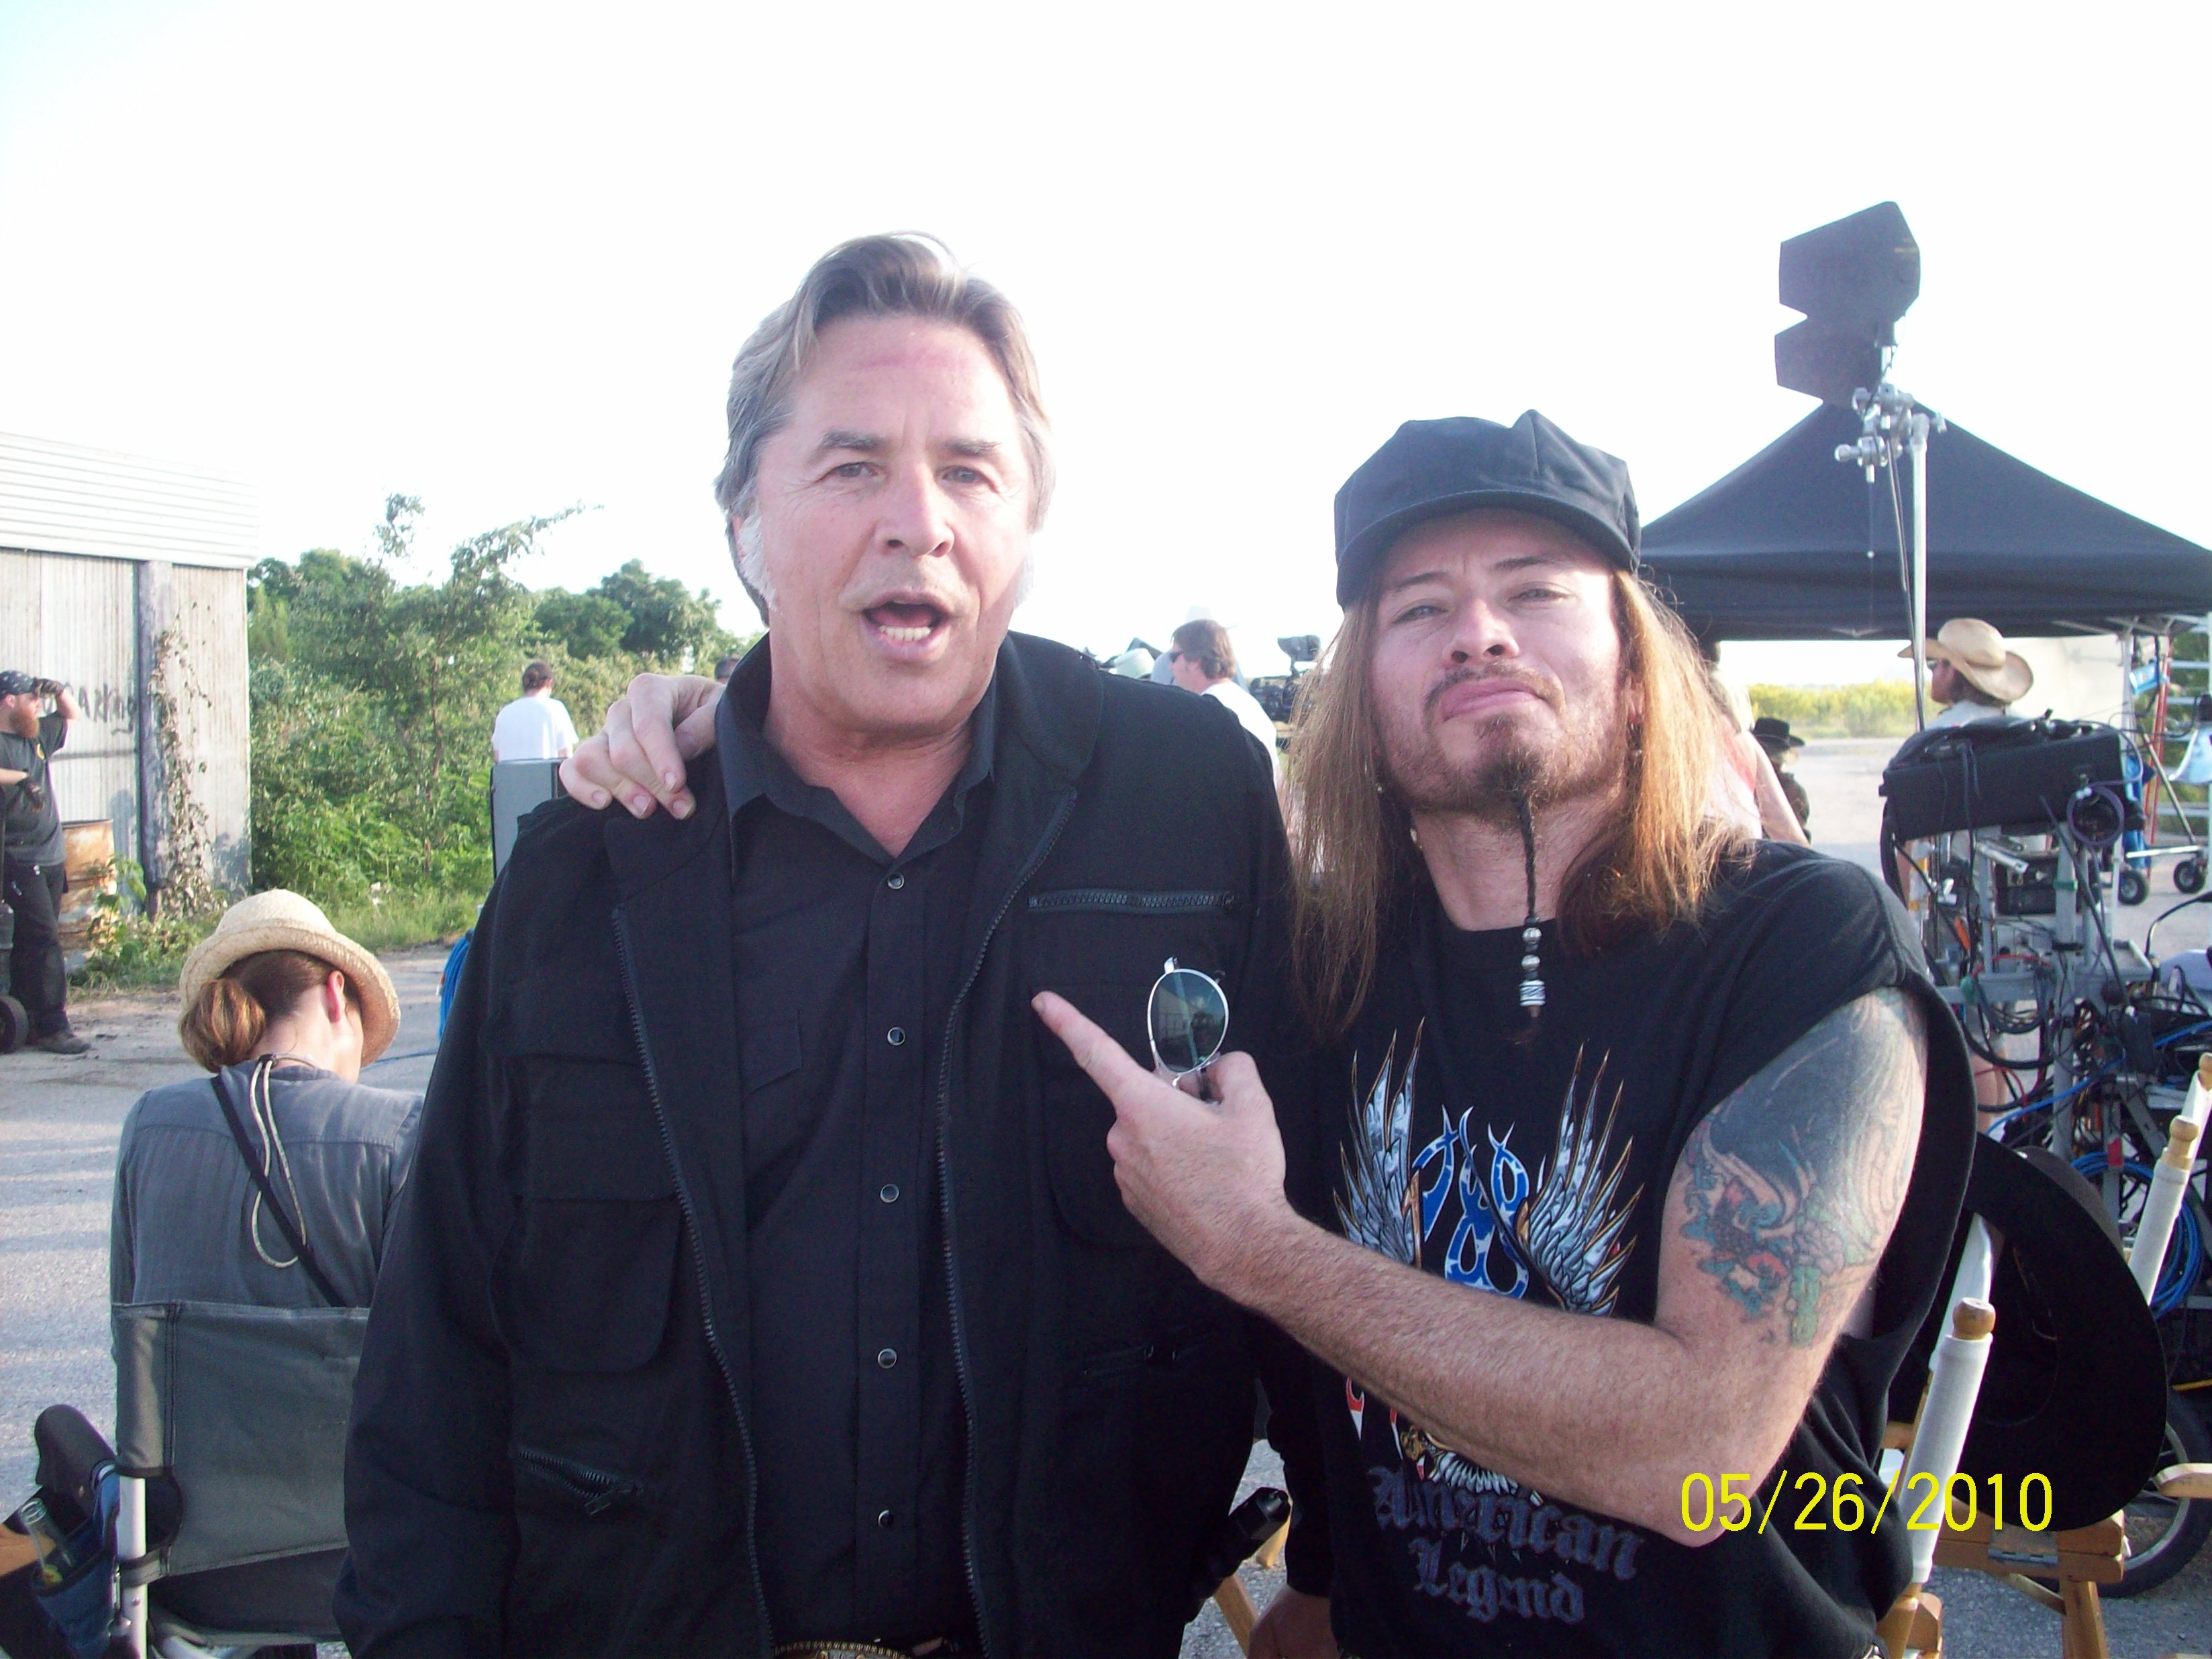 On the set of Machete with Don Johnson.